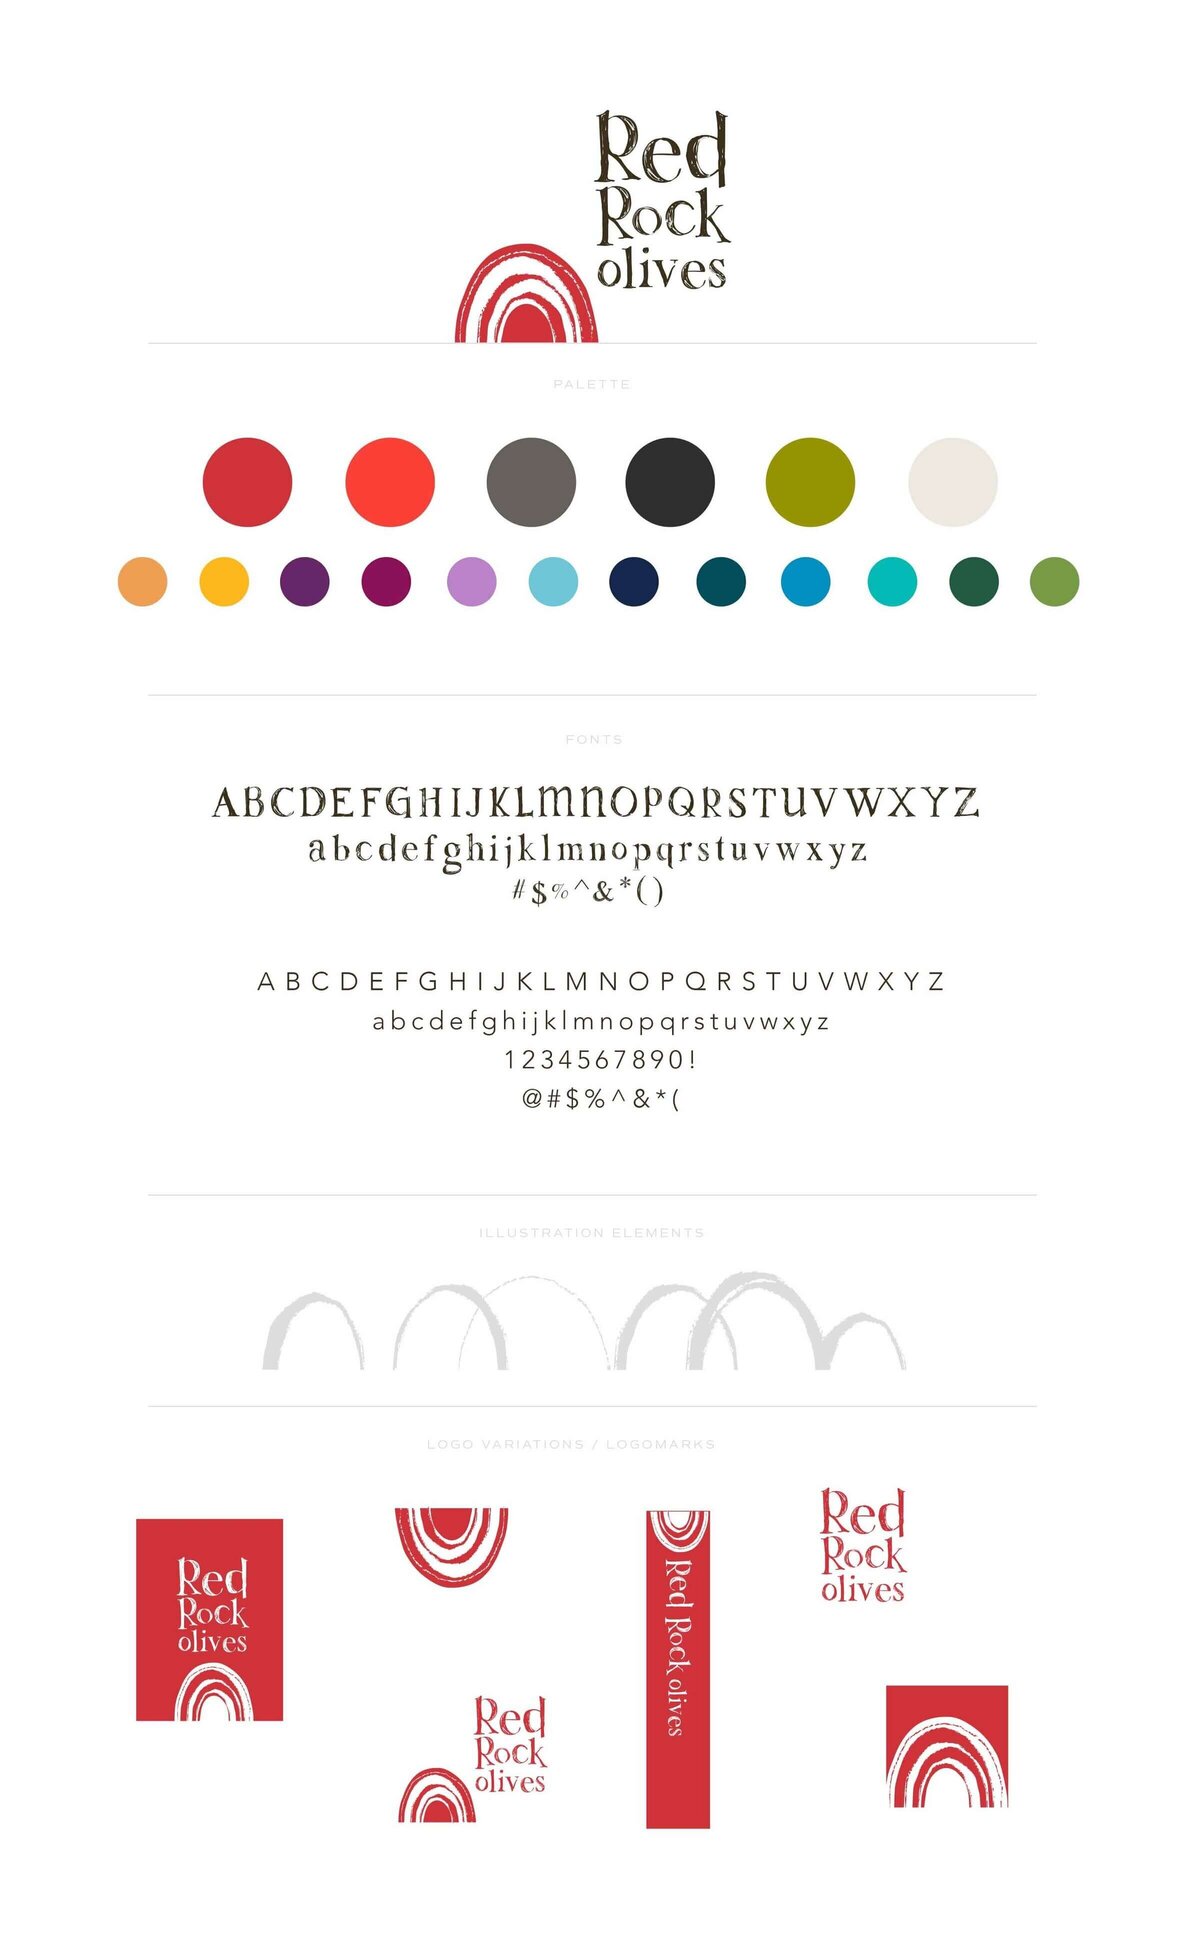 Red Rock Olives brand guidelines including colourful palette, funky font choices and curved illustration elements